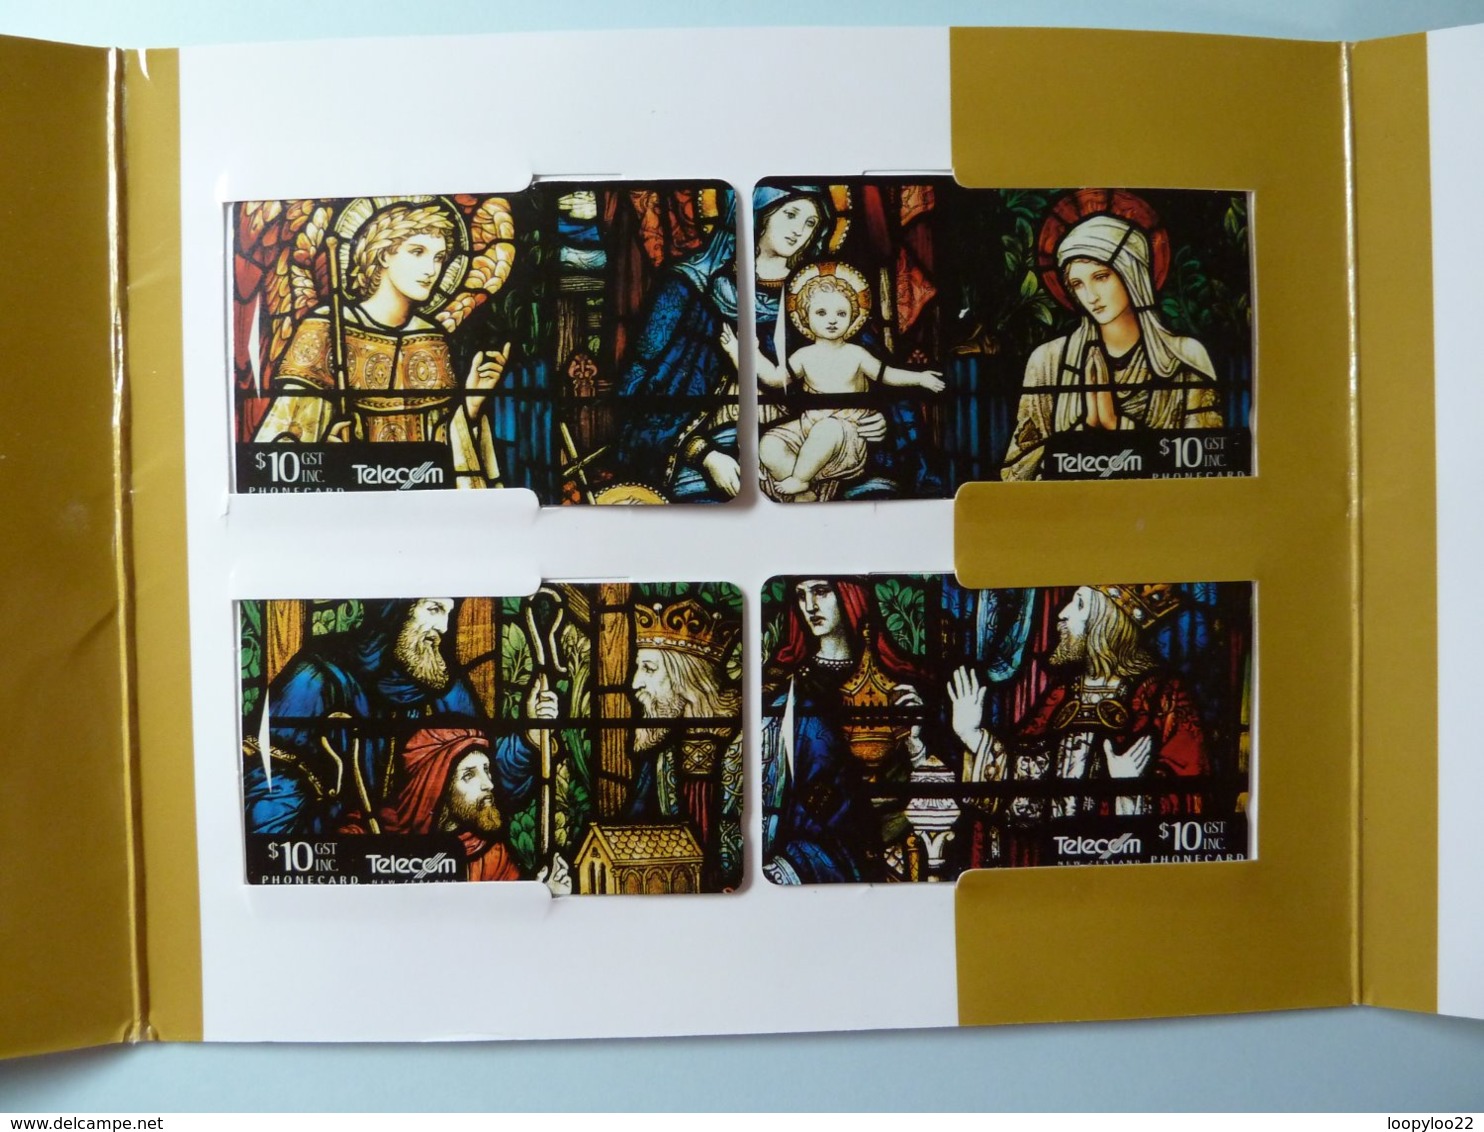 New Zealand - GPT - Stained Glass Windows - Phonecard & Stamp - Limited Edition 3000ex & Certificate - Mint In Folder - Nouvelle-Zélande